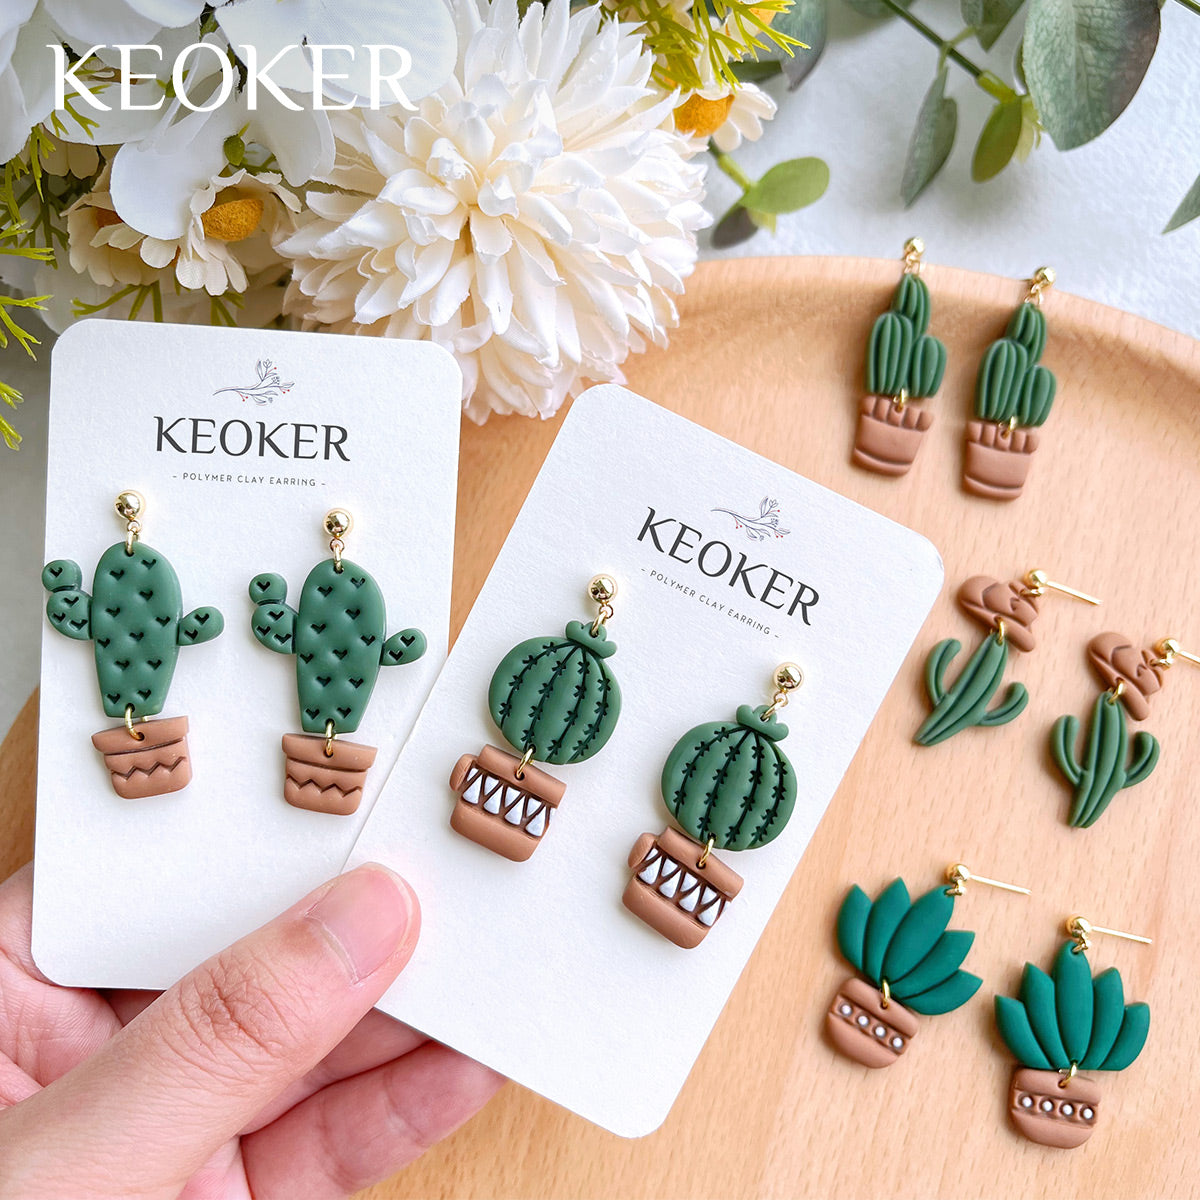 KEOKER Clay Cutters for Polymer Clay Jewelry(Potted Plant Clay Cutters